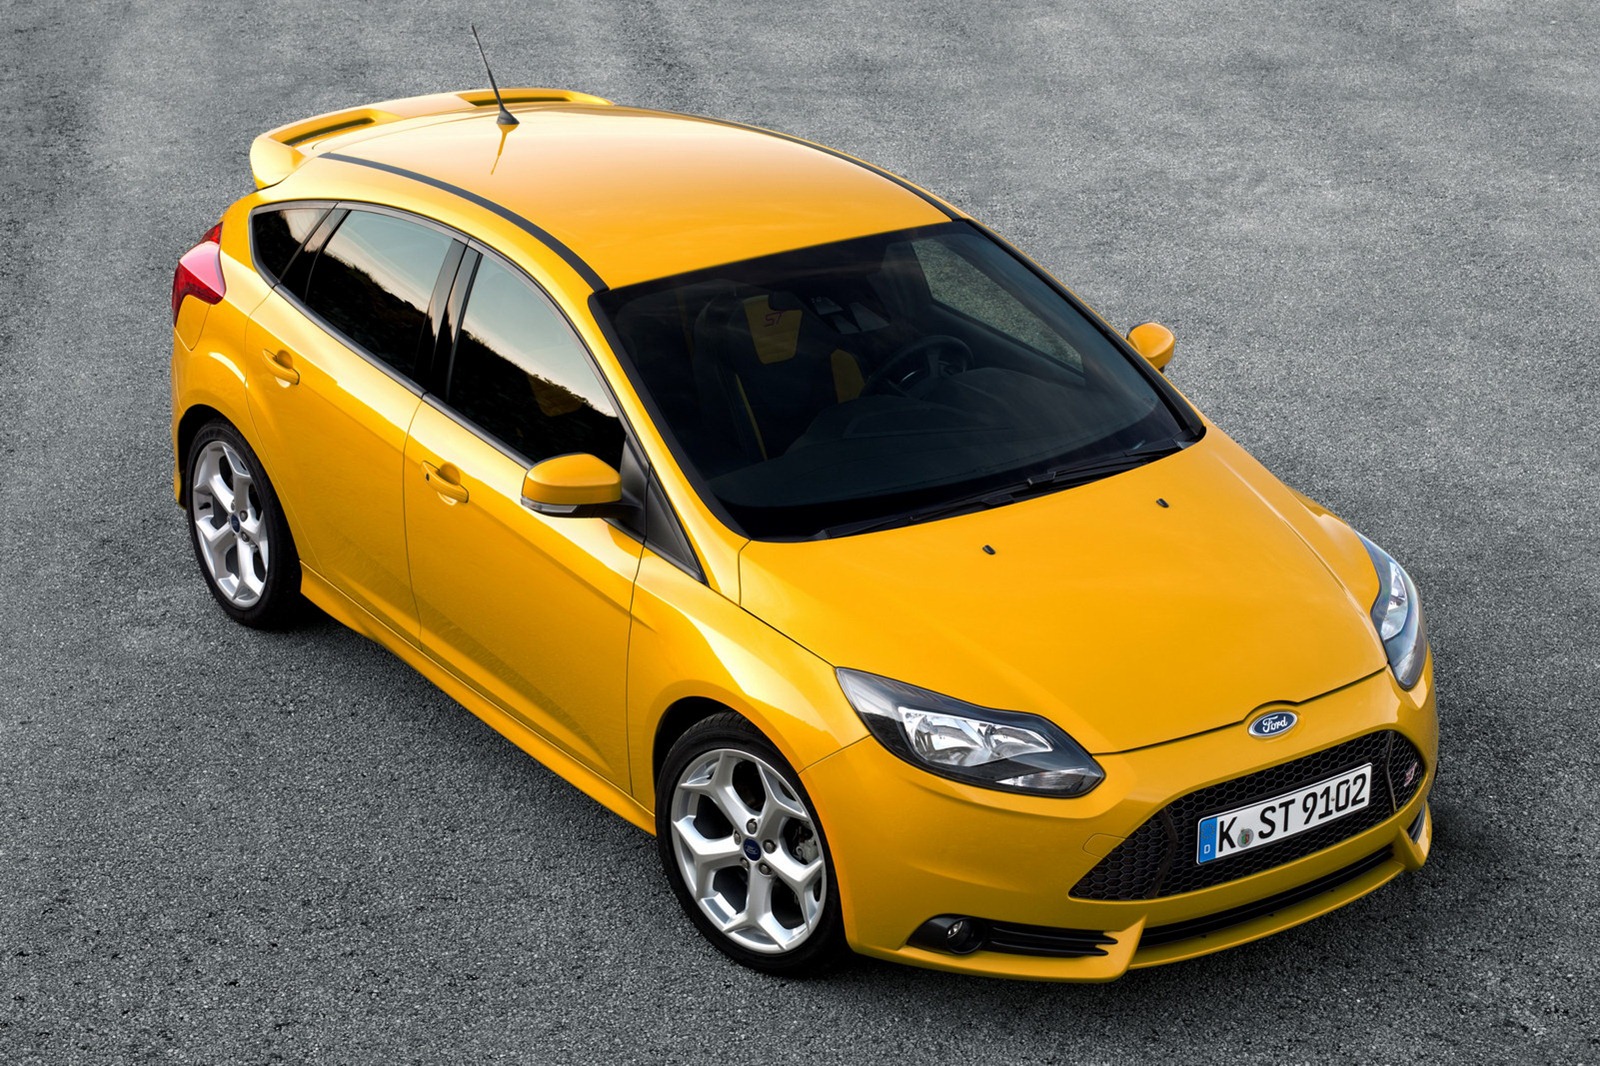 2013 Ford Focus ST on sale in the UK priced from £21,995 - ForceGT.com